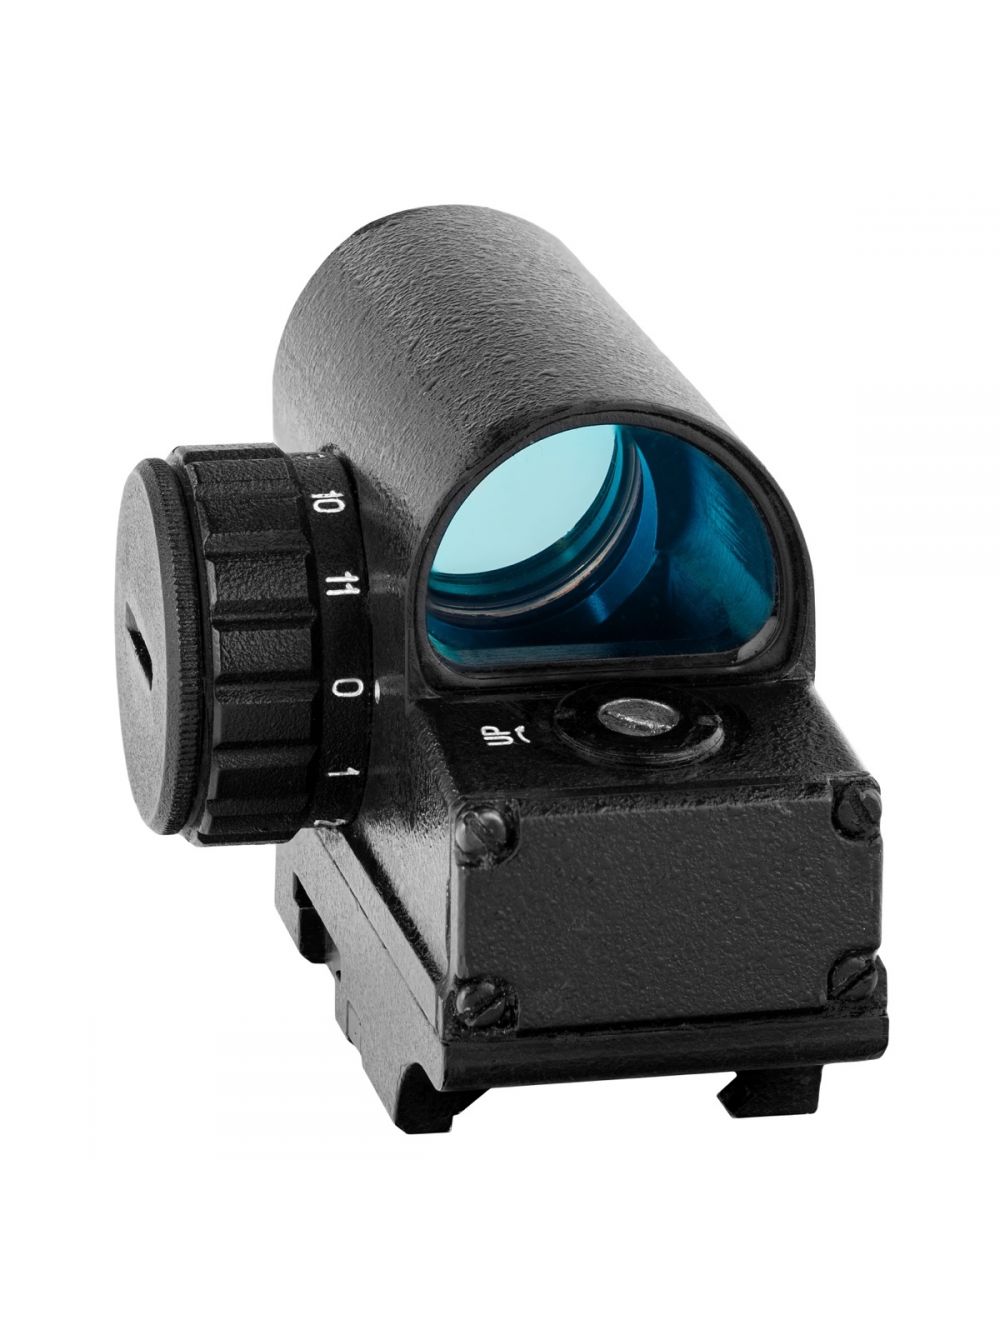 RS-M Close Red Dot Sight for Picatinny. 2.5 MOA